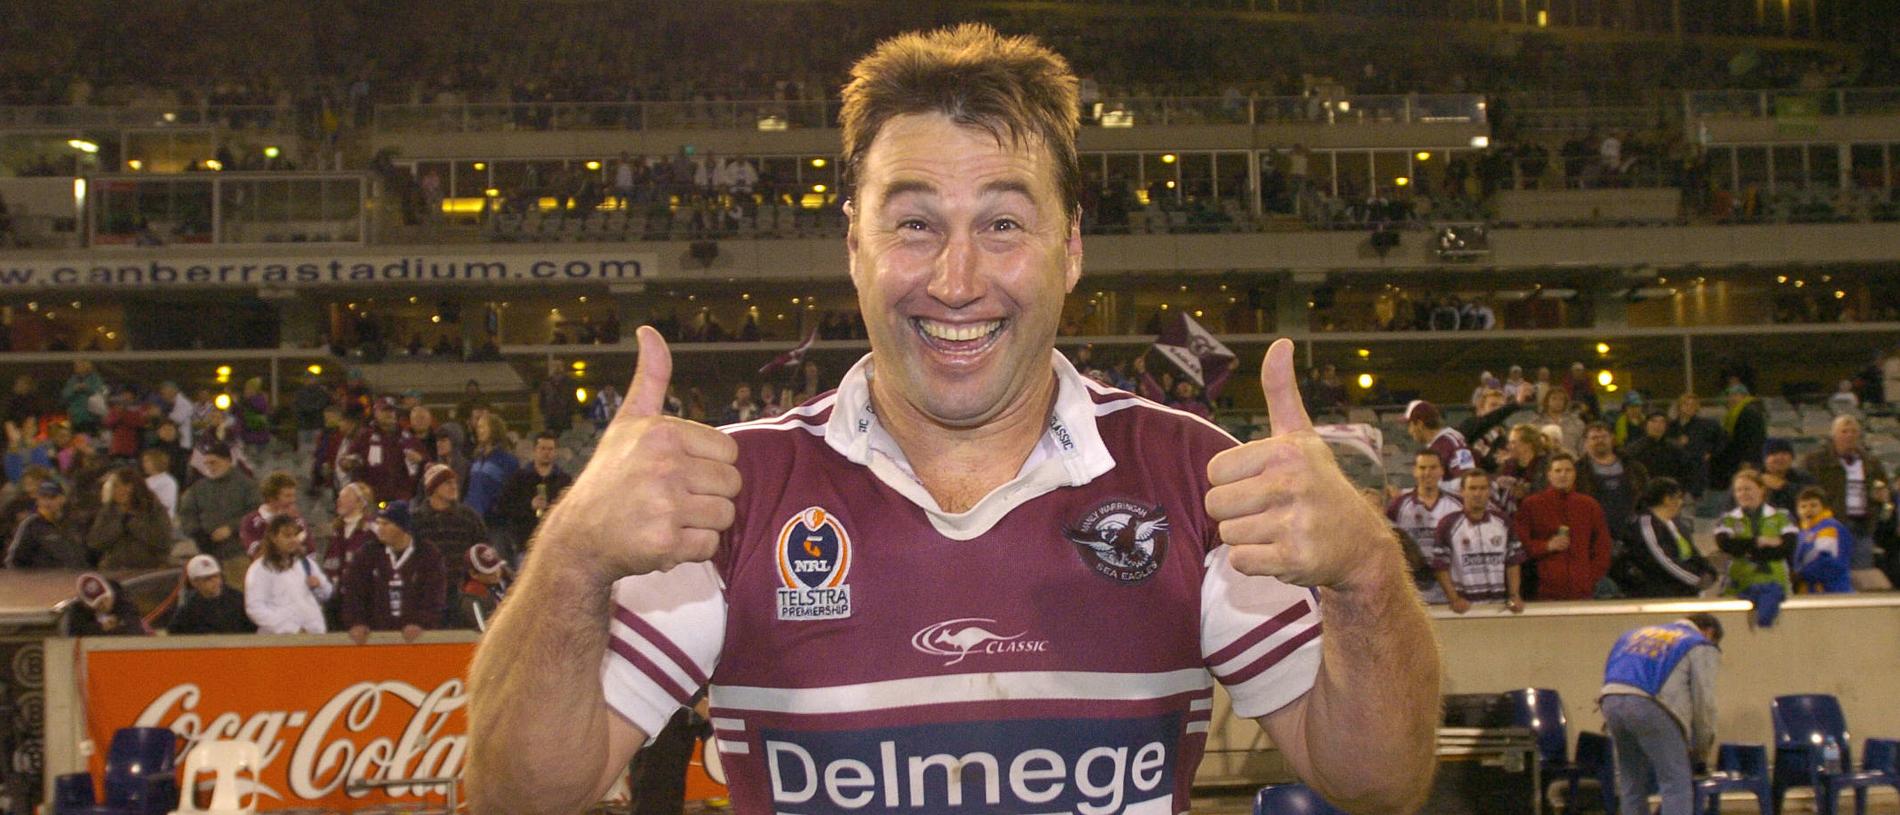 03 Sept 2005 Manly's Terry Hill gives thumbs up after their victory in Canberra Raiders vs Manly Sea Eagles NRL game at Canberra Stadium. thumbs /up sport nrl action headshot